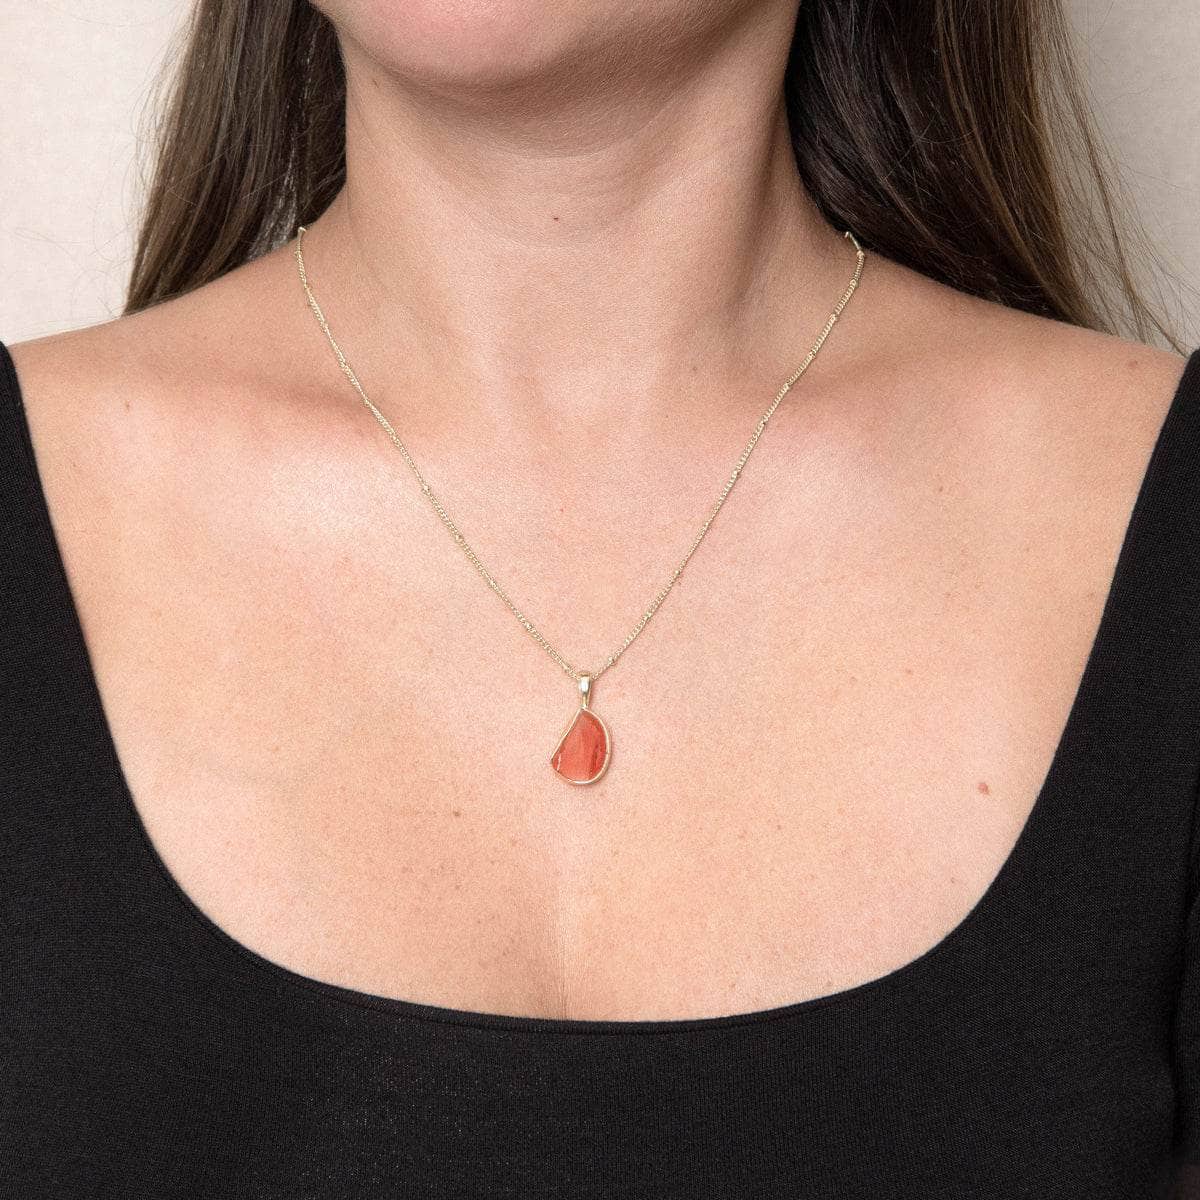 Healing Carnelian Necklace For Peace - Inspire Uplift